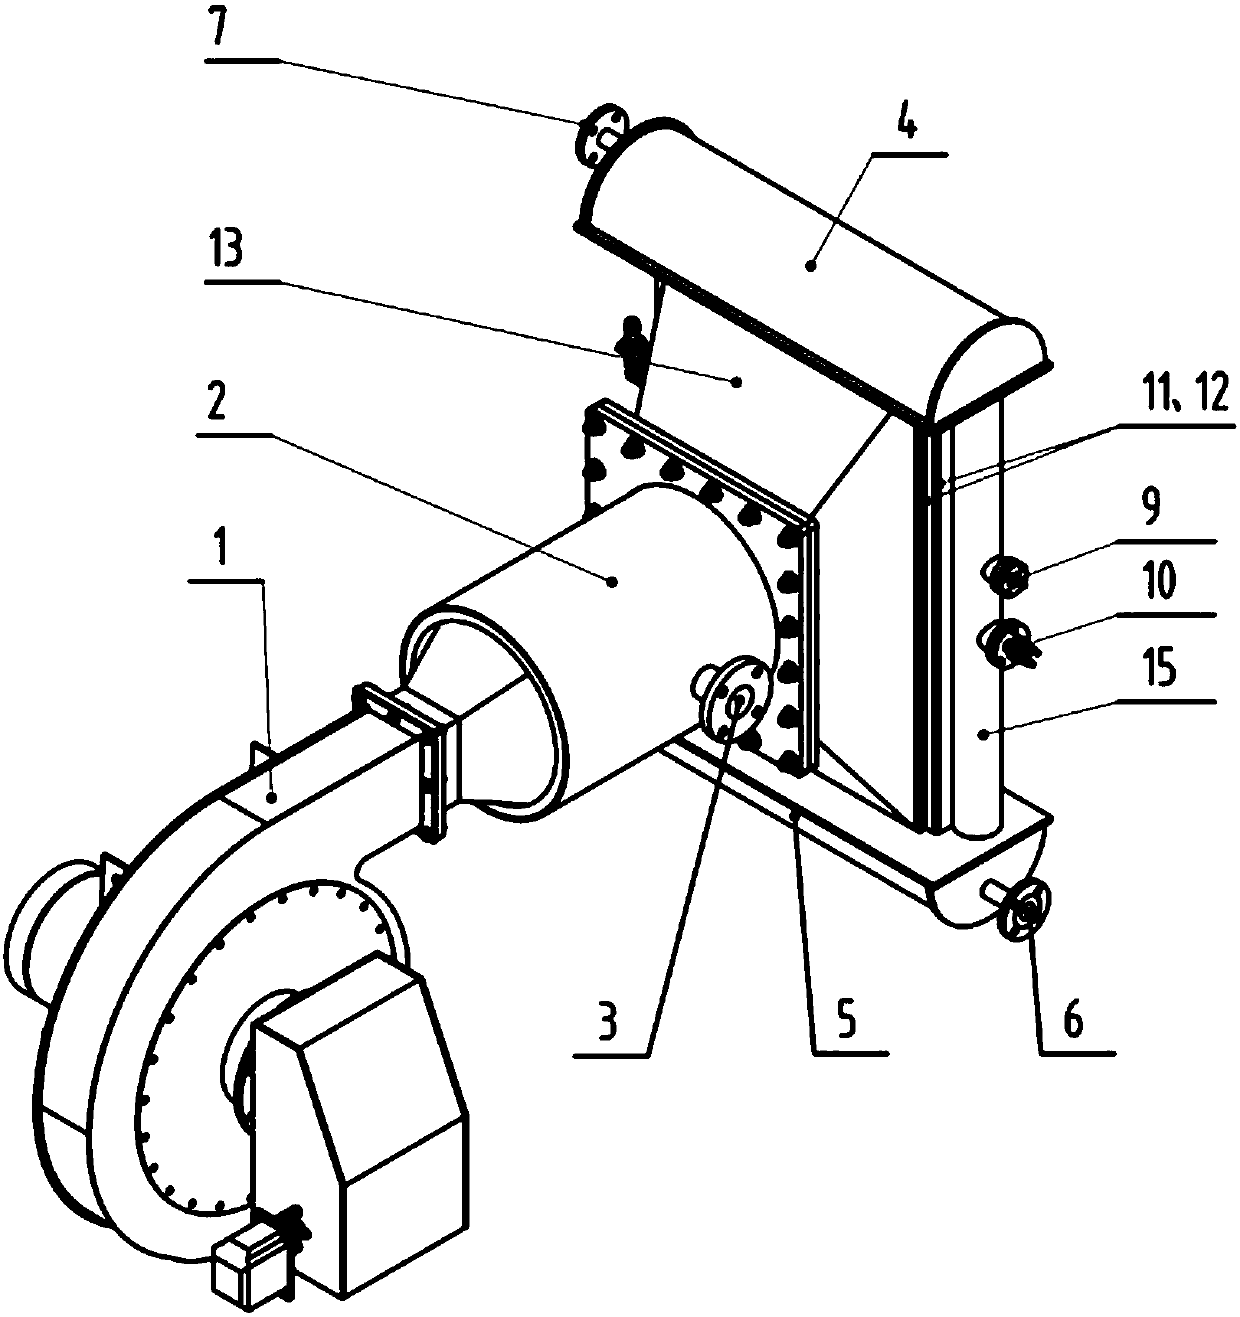 Burner of slotted type flame combustion device